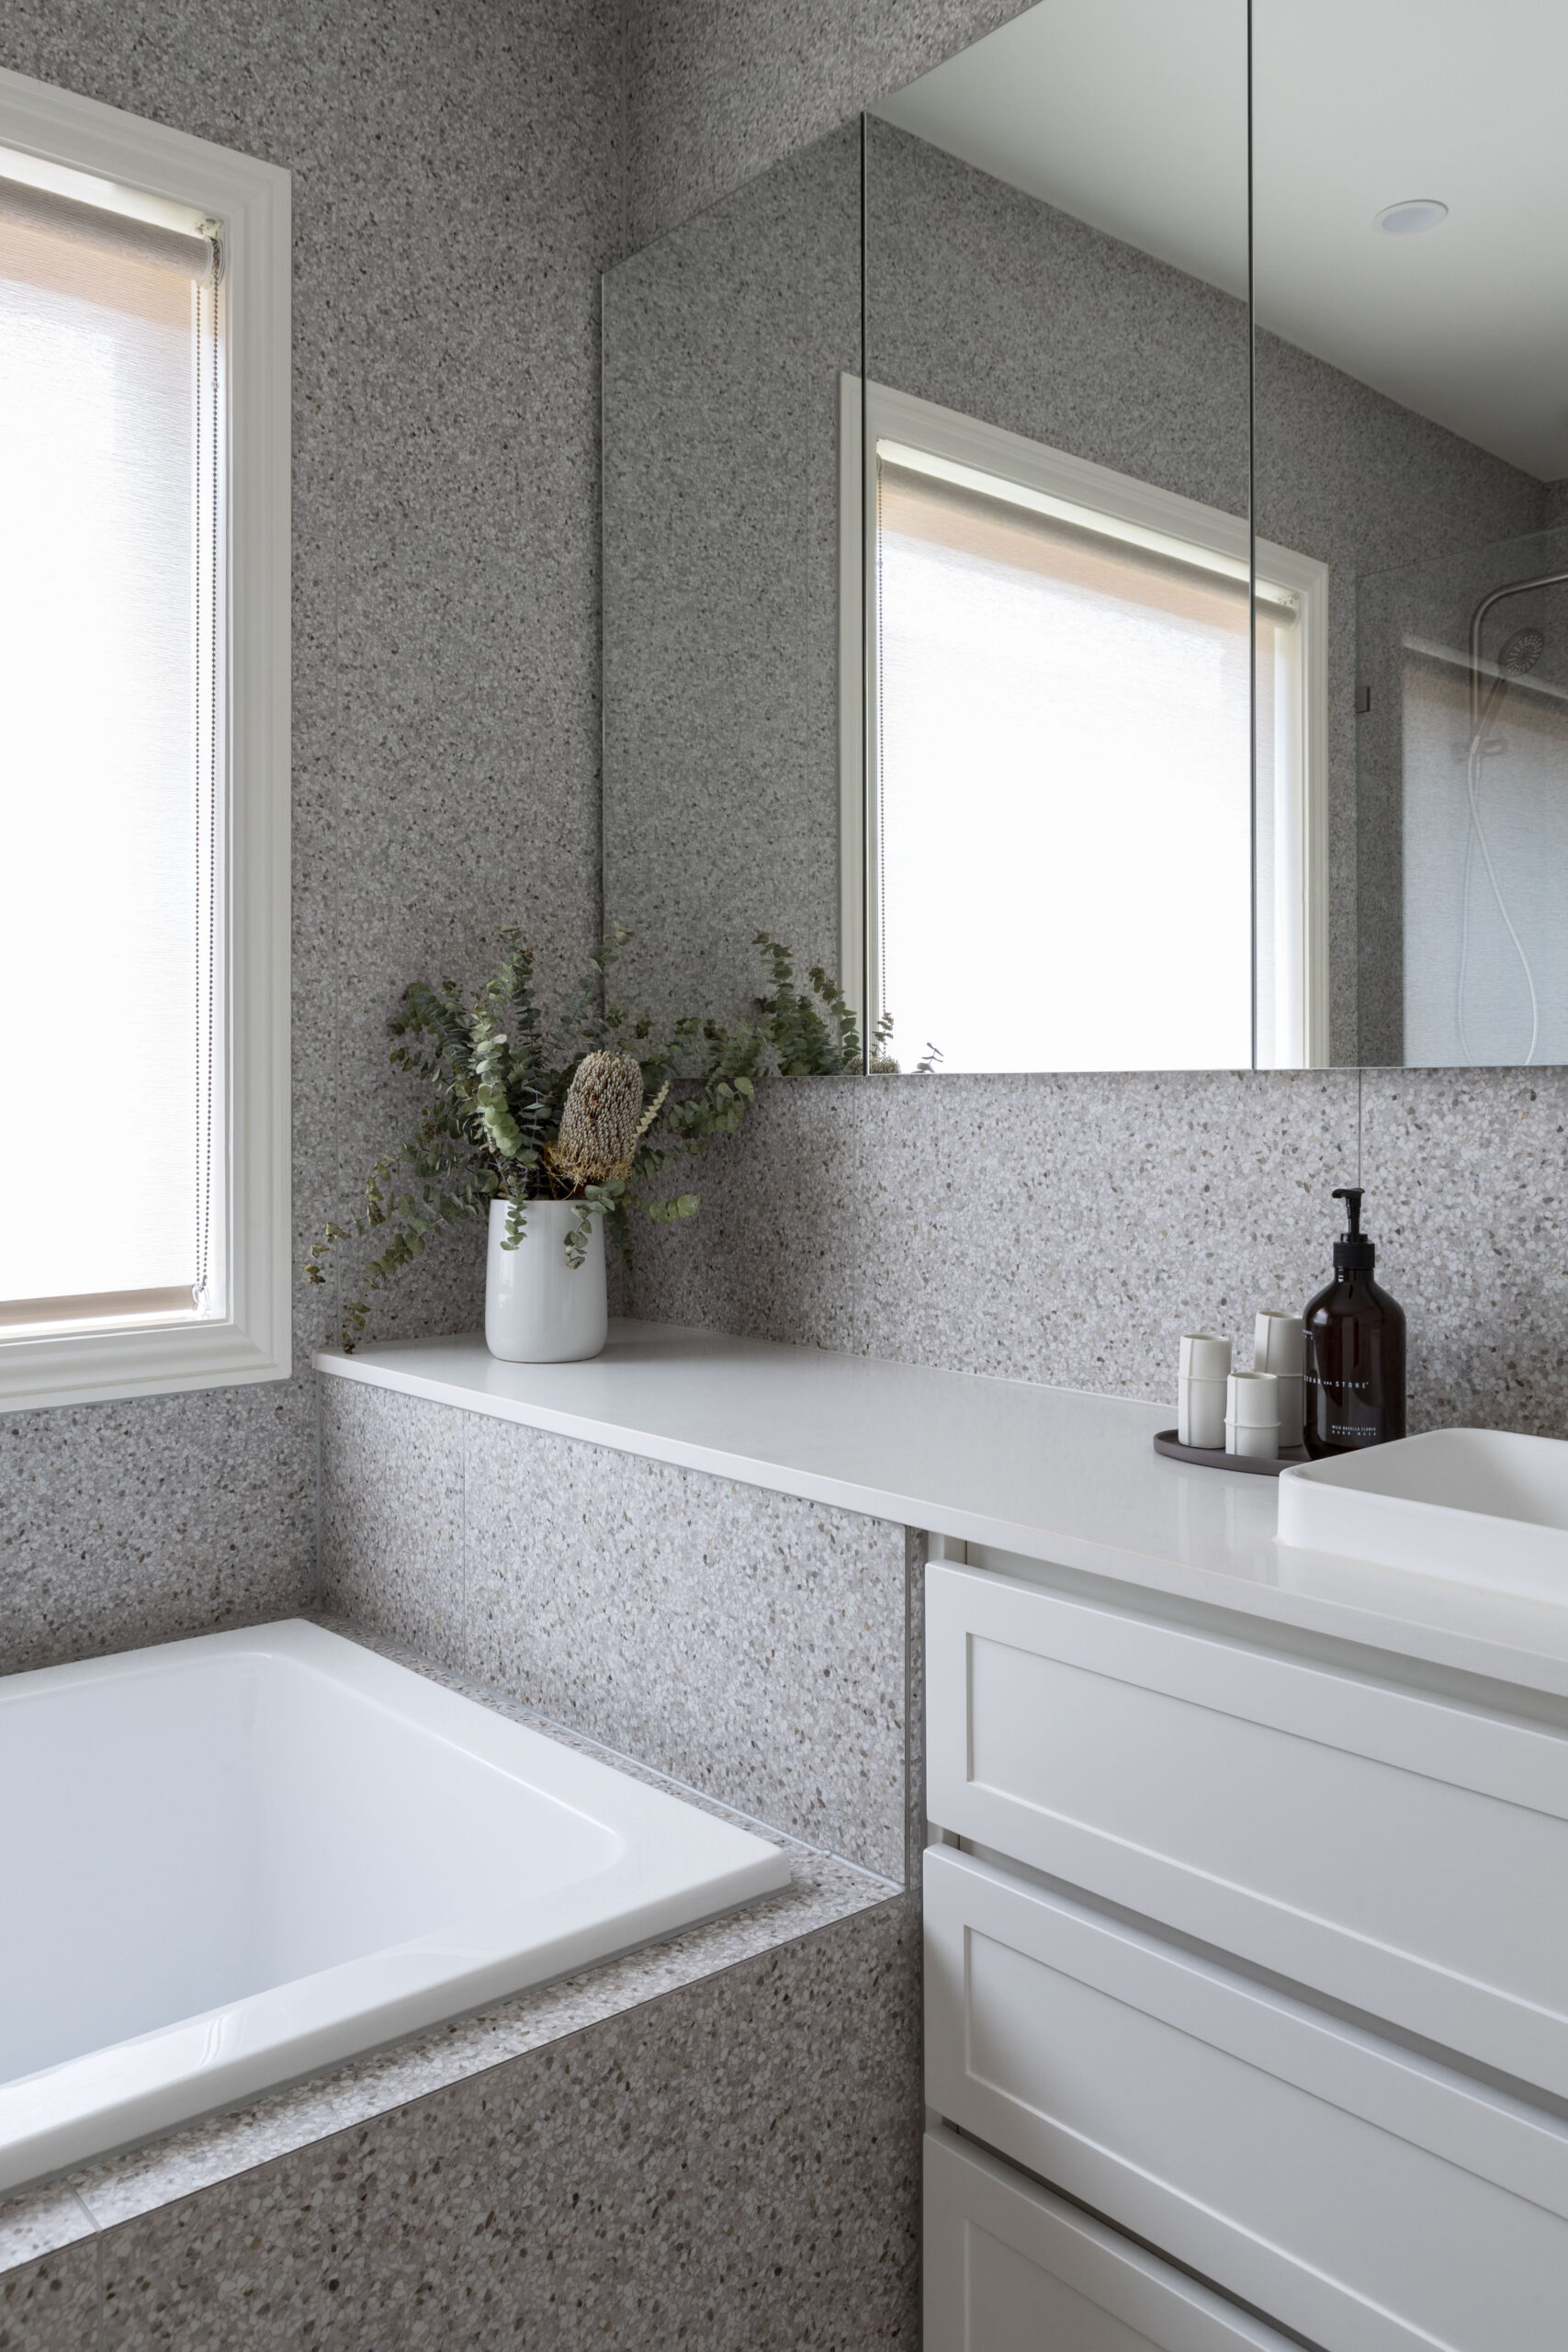 Built in bath with grey tile against a custom vanity unit with shaker style drawers in white